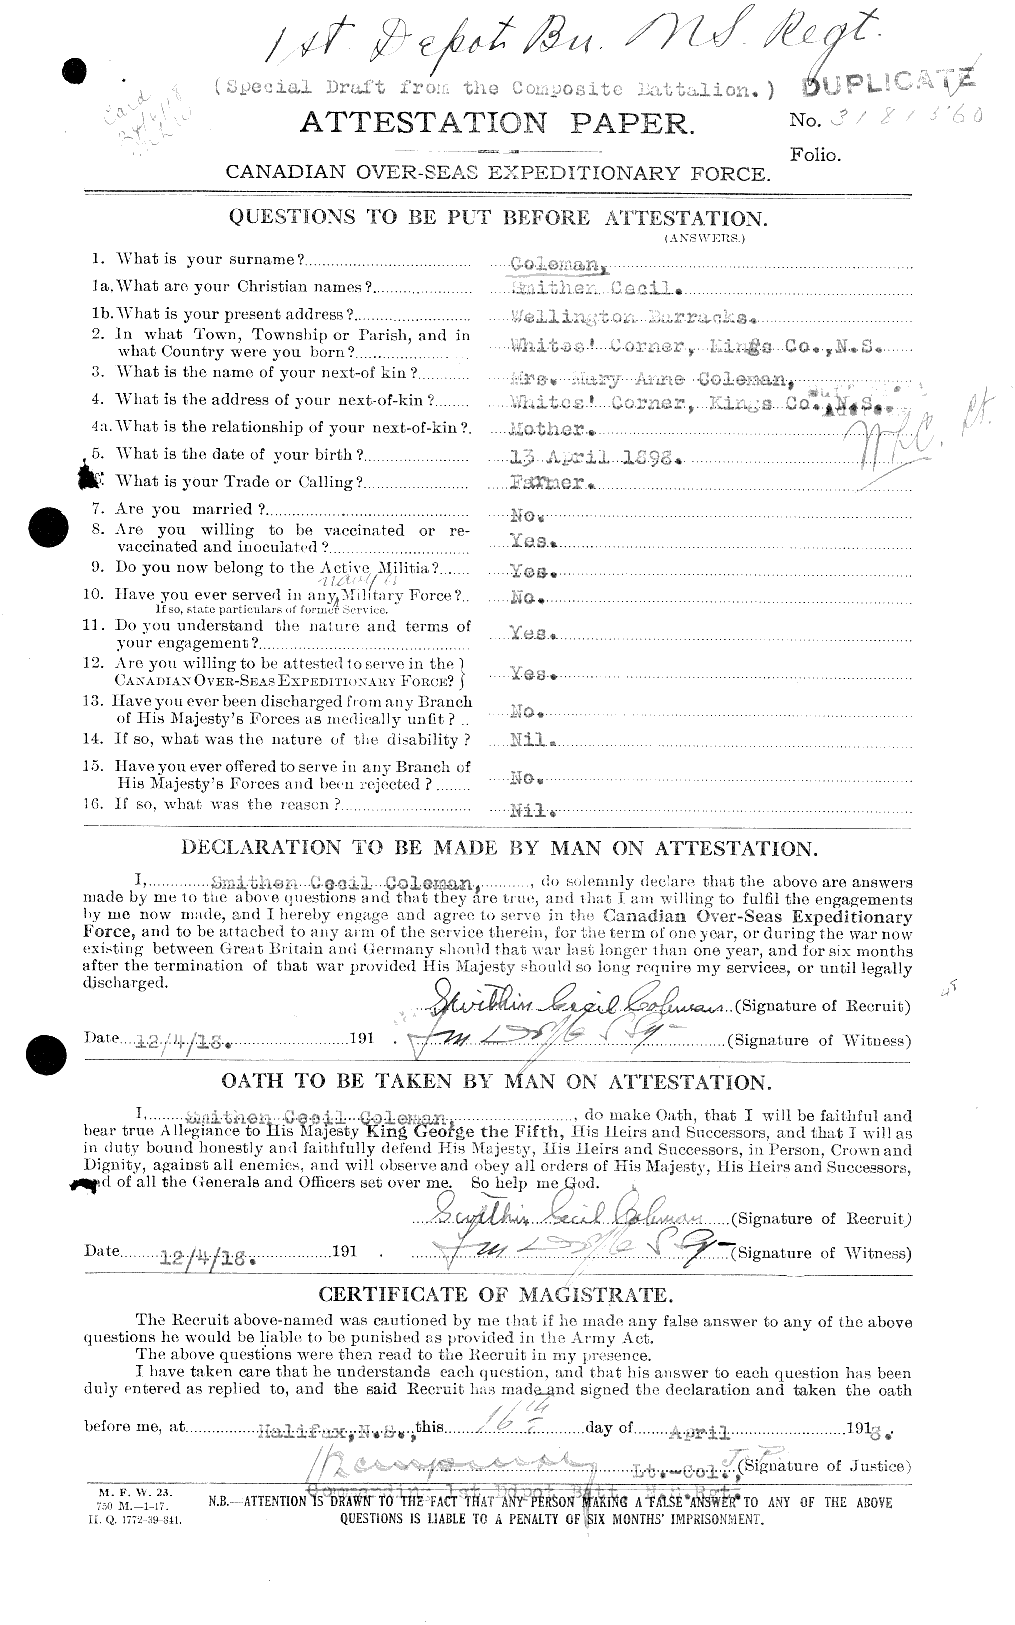 Personnel Records of the First World War - CEF 028267a